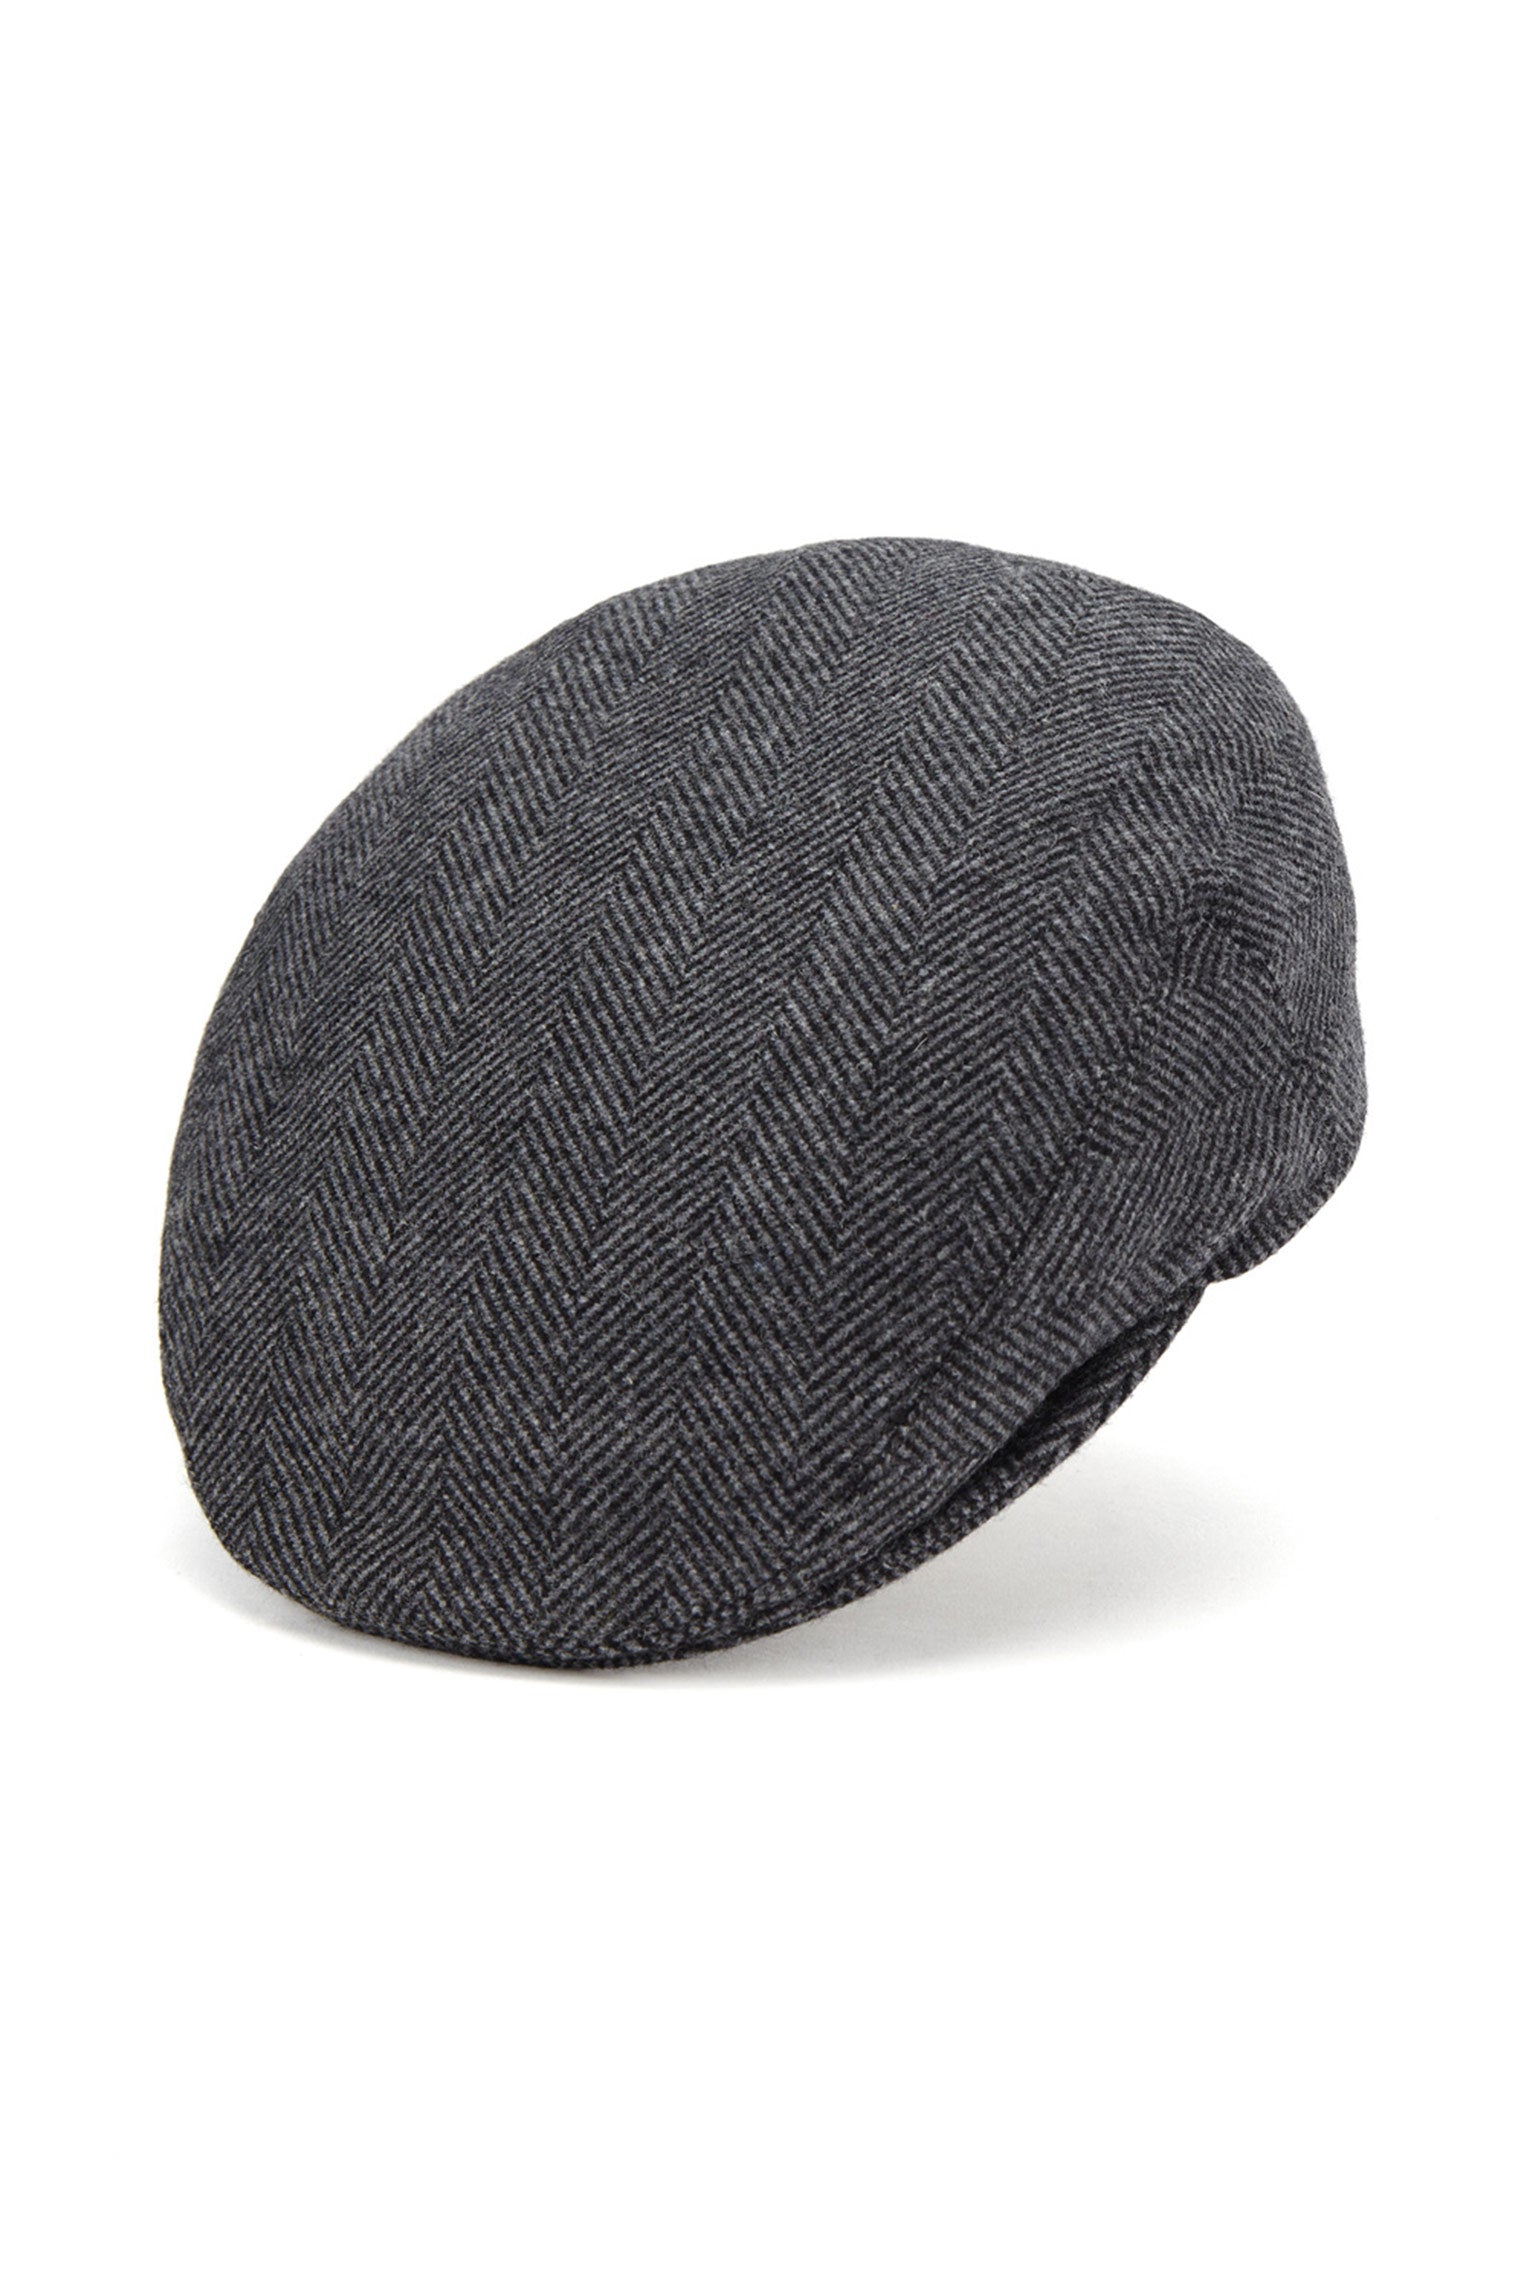 Gill Flat Cap - Hats for Oval Face Shapes - Lock & Co. Hatters London UK